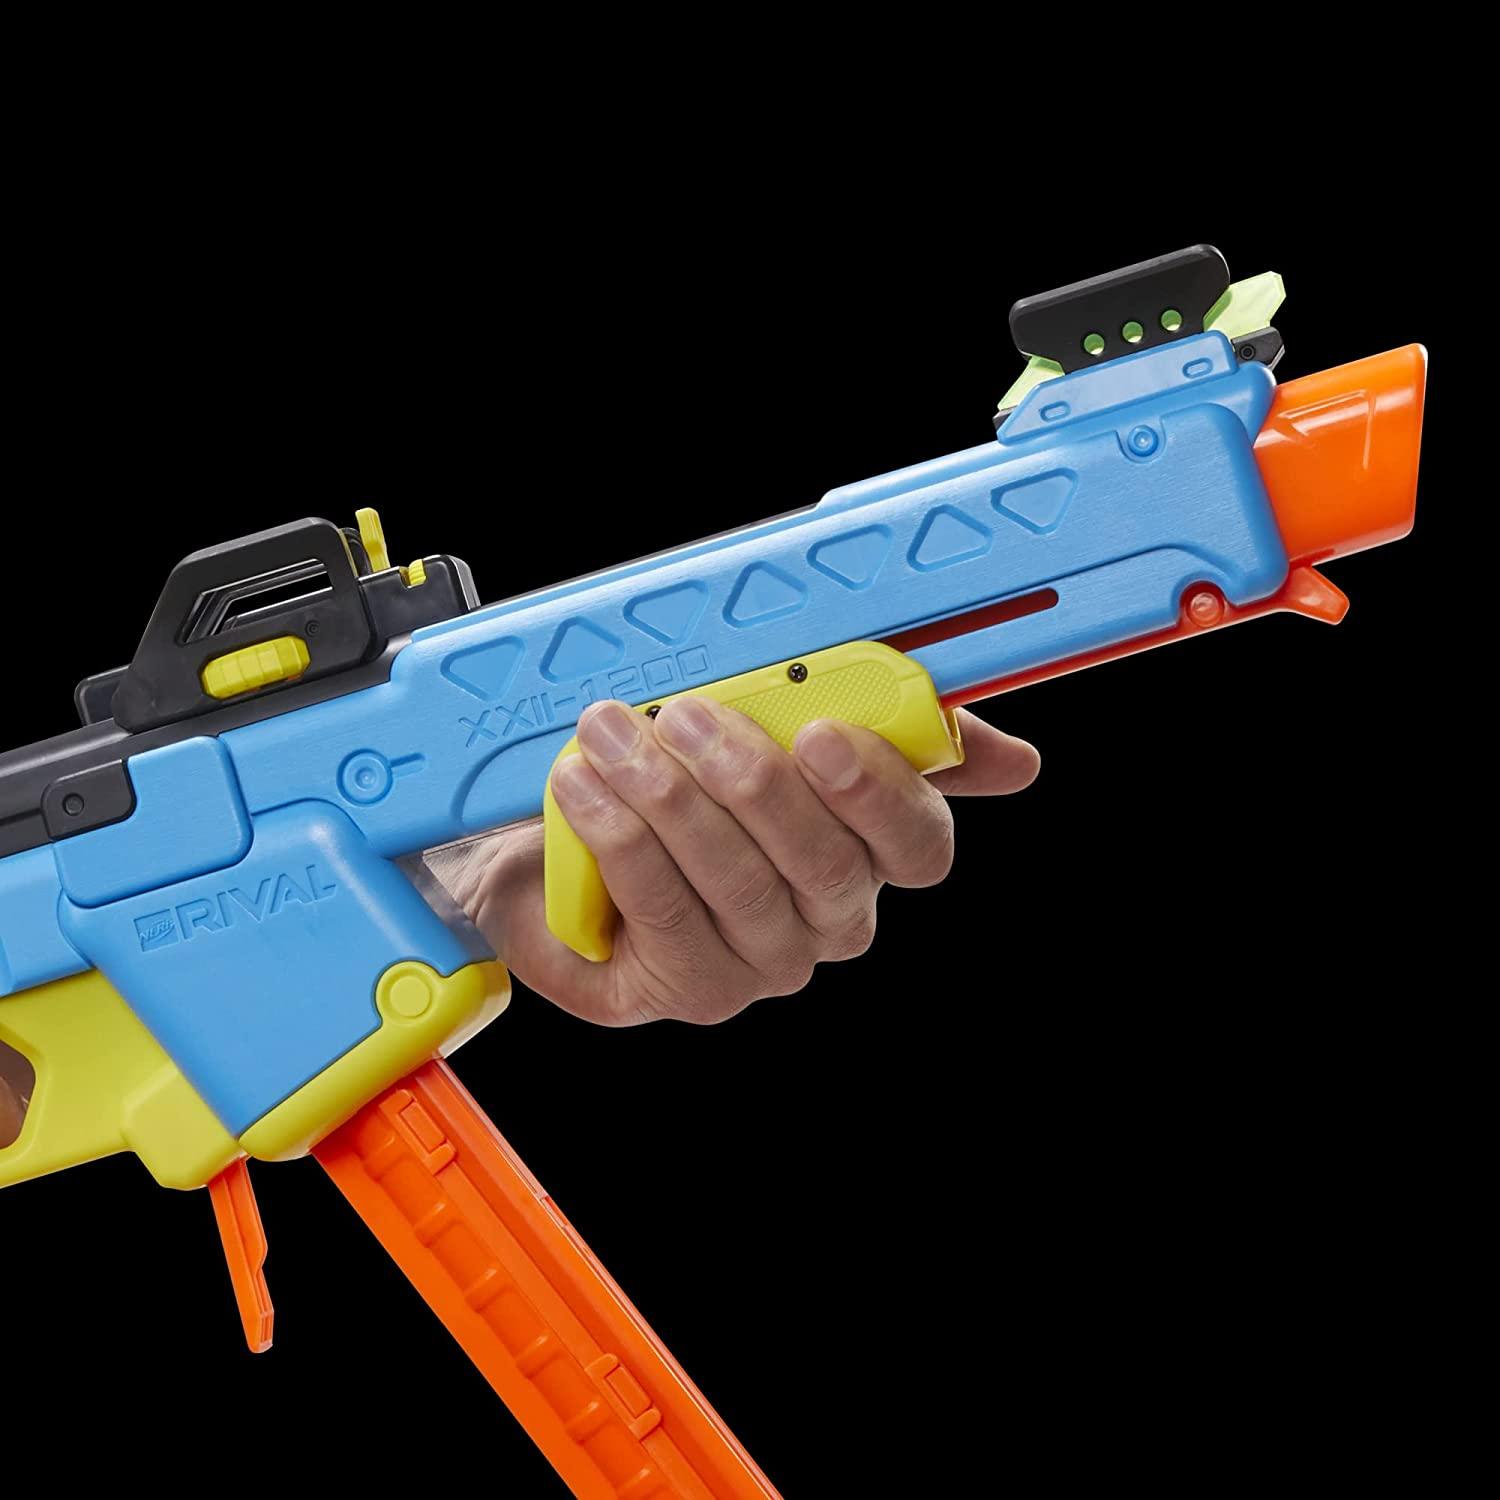 Nerf Rival Pathfinder XXII-1200 Blaster, Most Accurate Nerf Rival System, Adjustable Sight, 12 Nerf Rival Accu-Rounds - FunCorp India